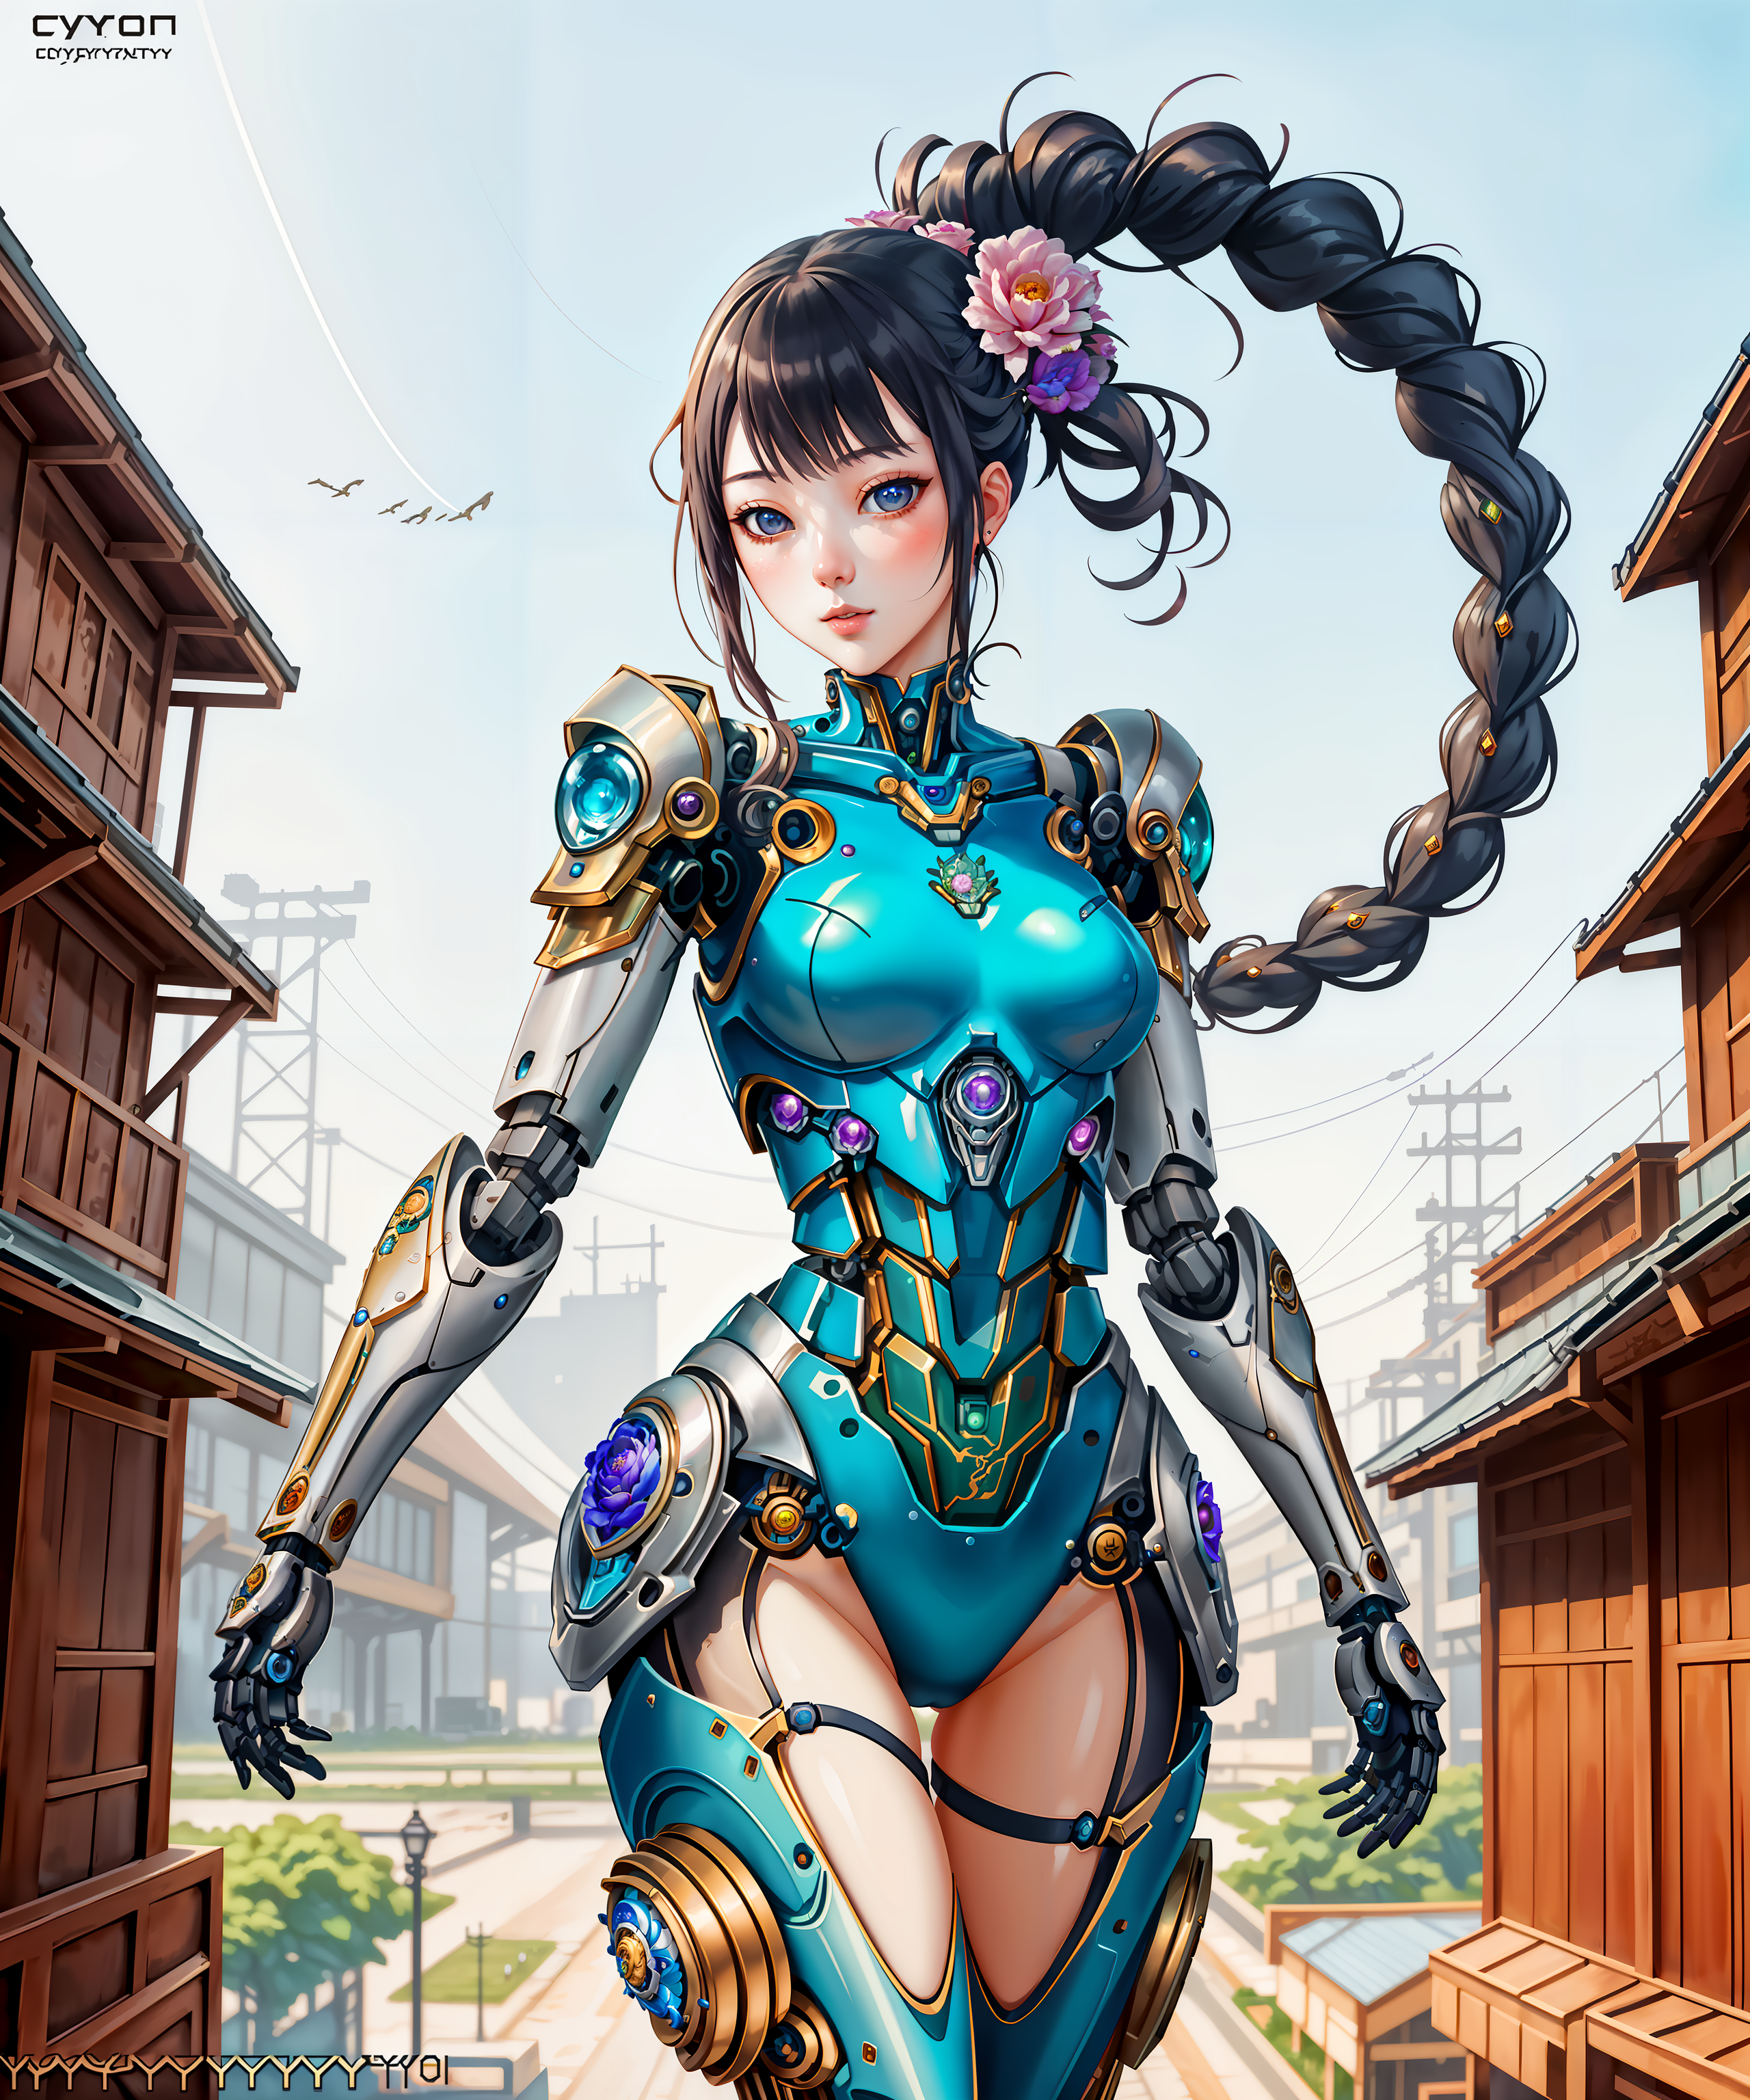 award winning, best quality, masterpiece, 1girl, 1mecha, cyberpunk robot, floral, fantasy scifi aesthetic, highly detailed...